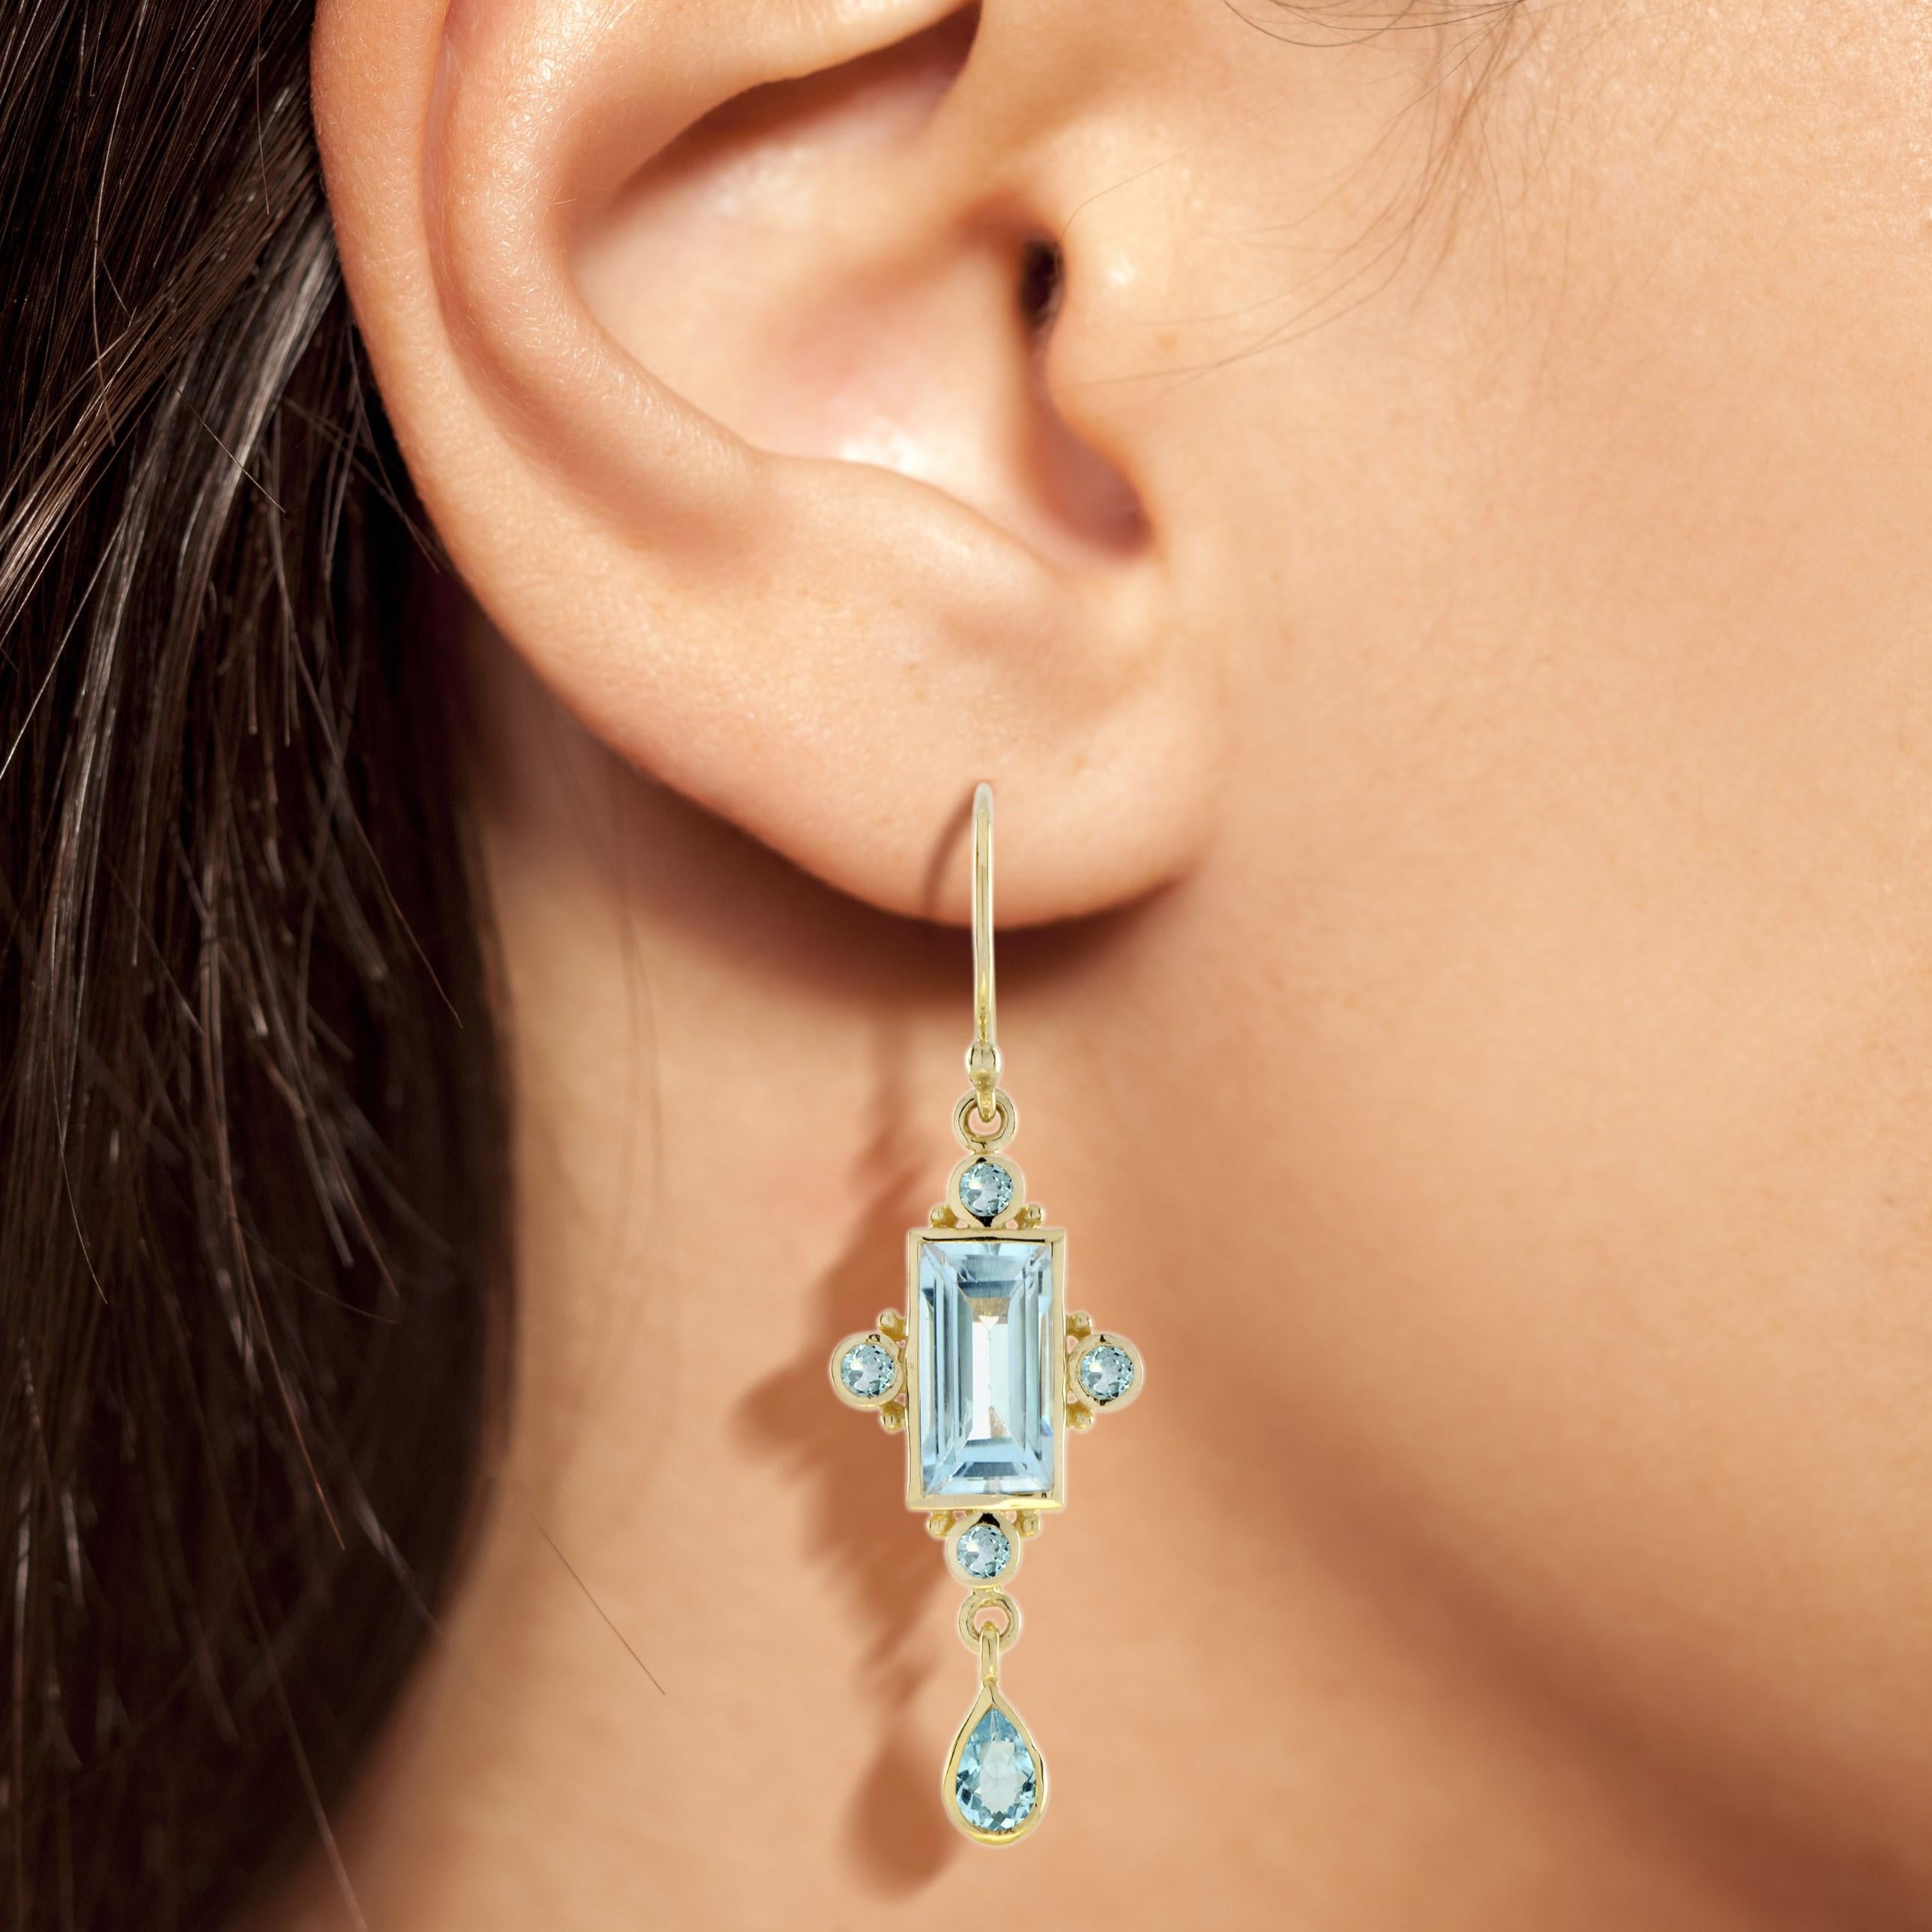 With a bright sky blue topaz in a bezel setting, these earrings are simple but eye-catching style. The stone is further accentuated with smaller round and drop blue topaz. This pair of earrings is perfect to to create your own personalized